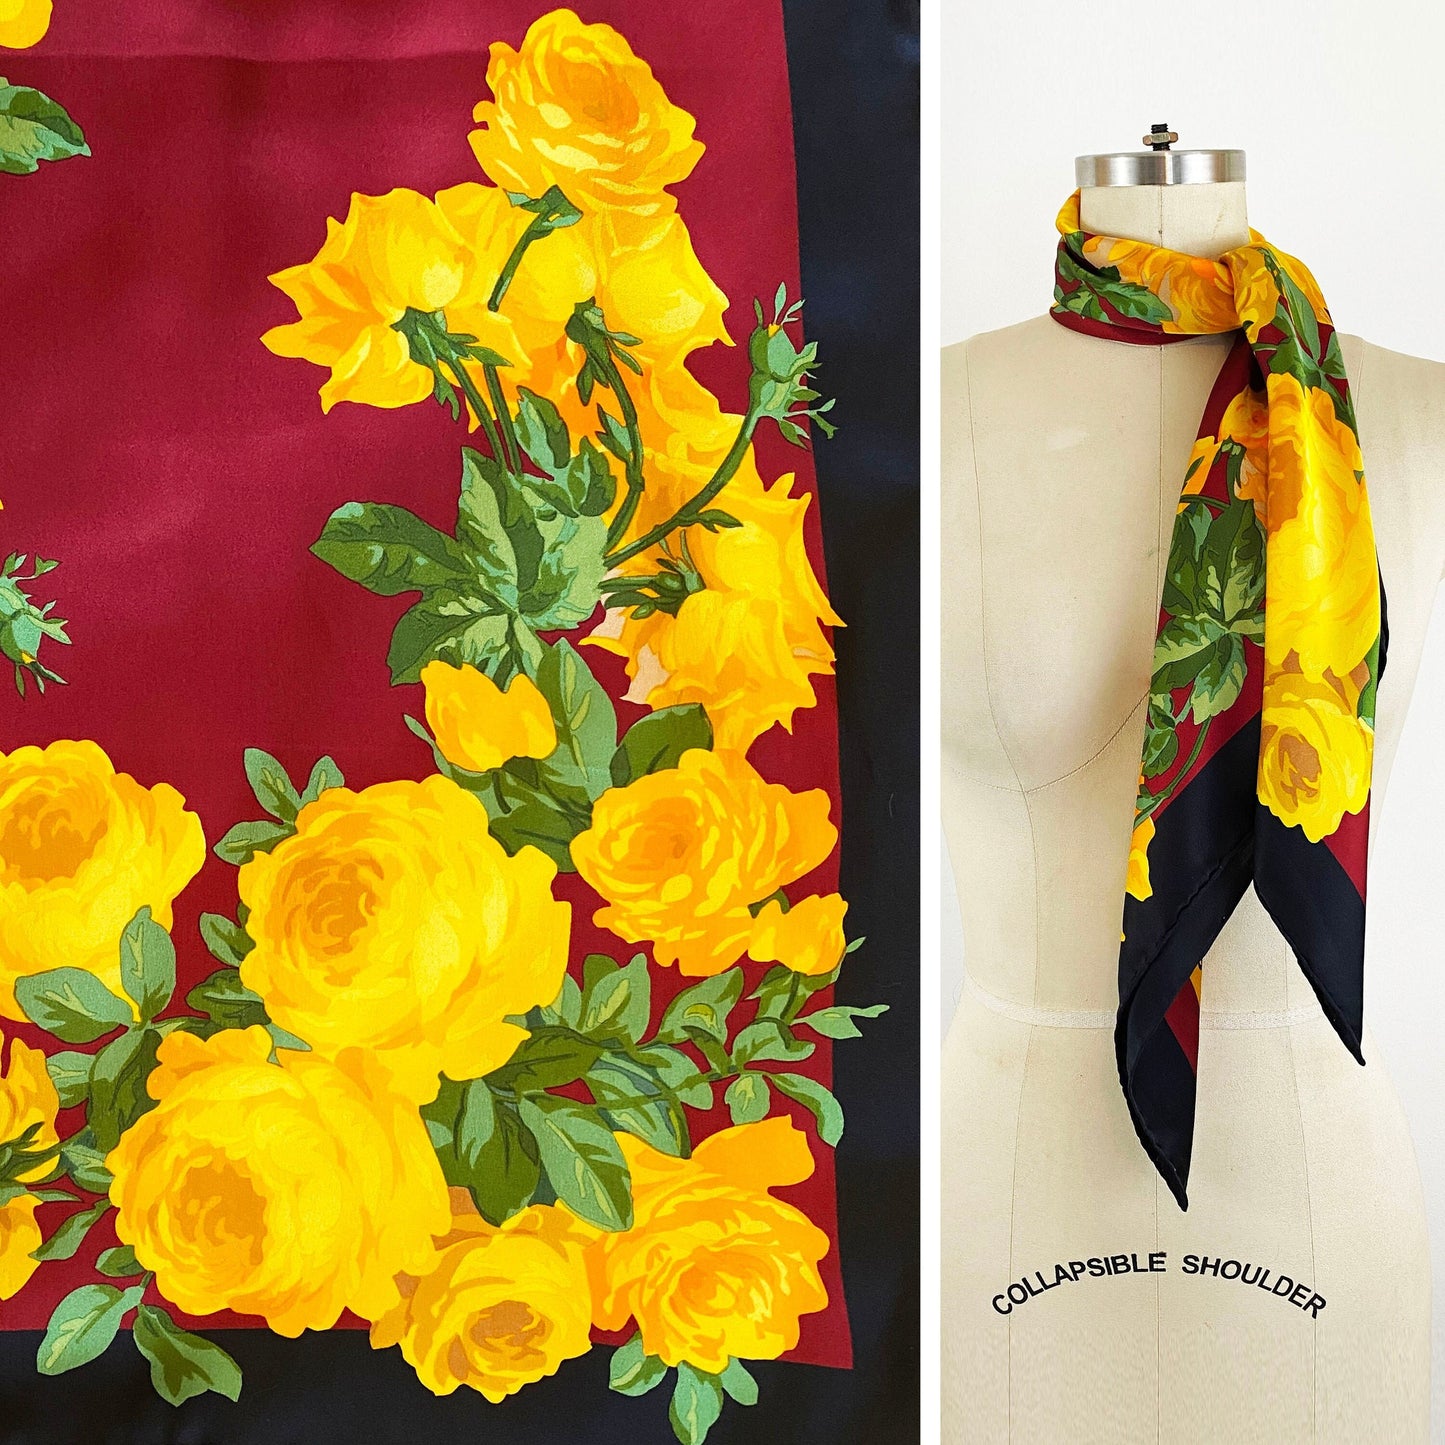 1990s Yves Saint Laurent Silk Twill Yellow Rose Scarf Large Square Made in Italy Floral Red Black Gold Romantic Gift YSL 90s Y2K